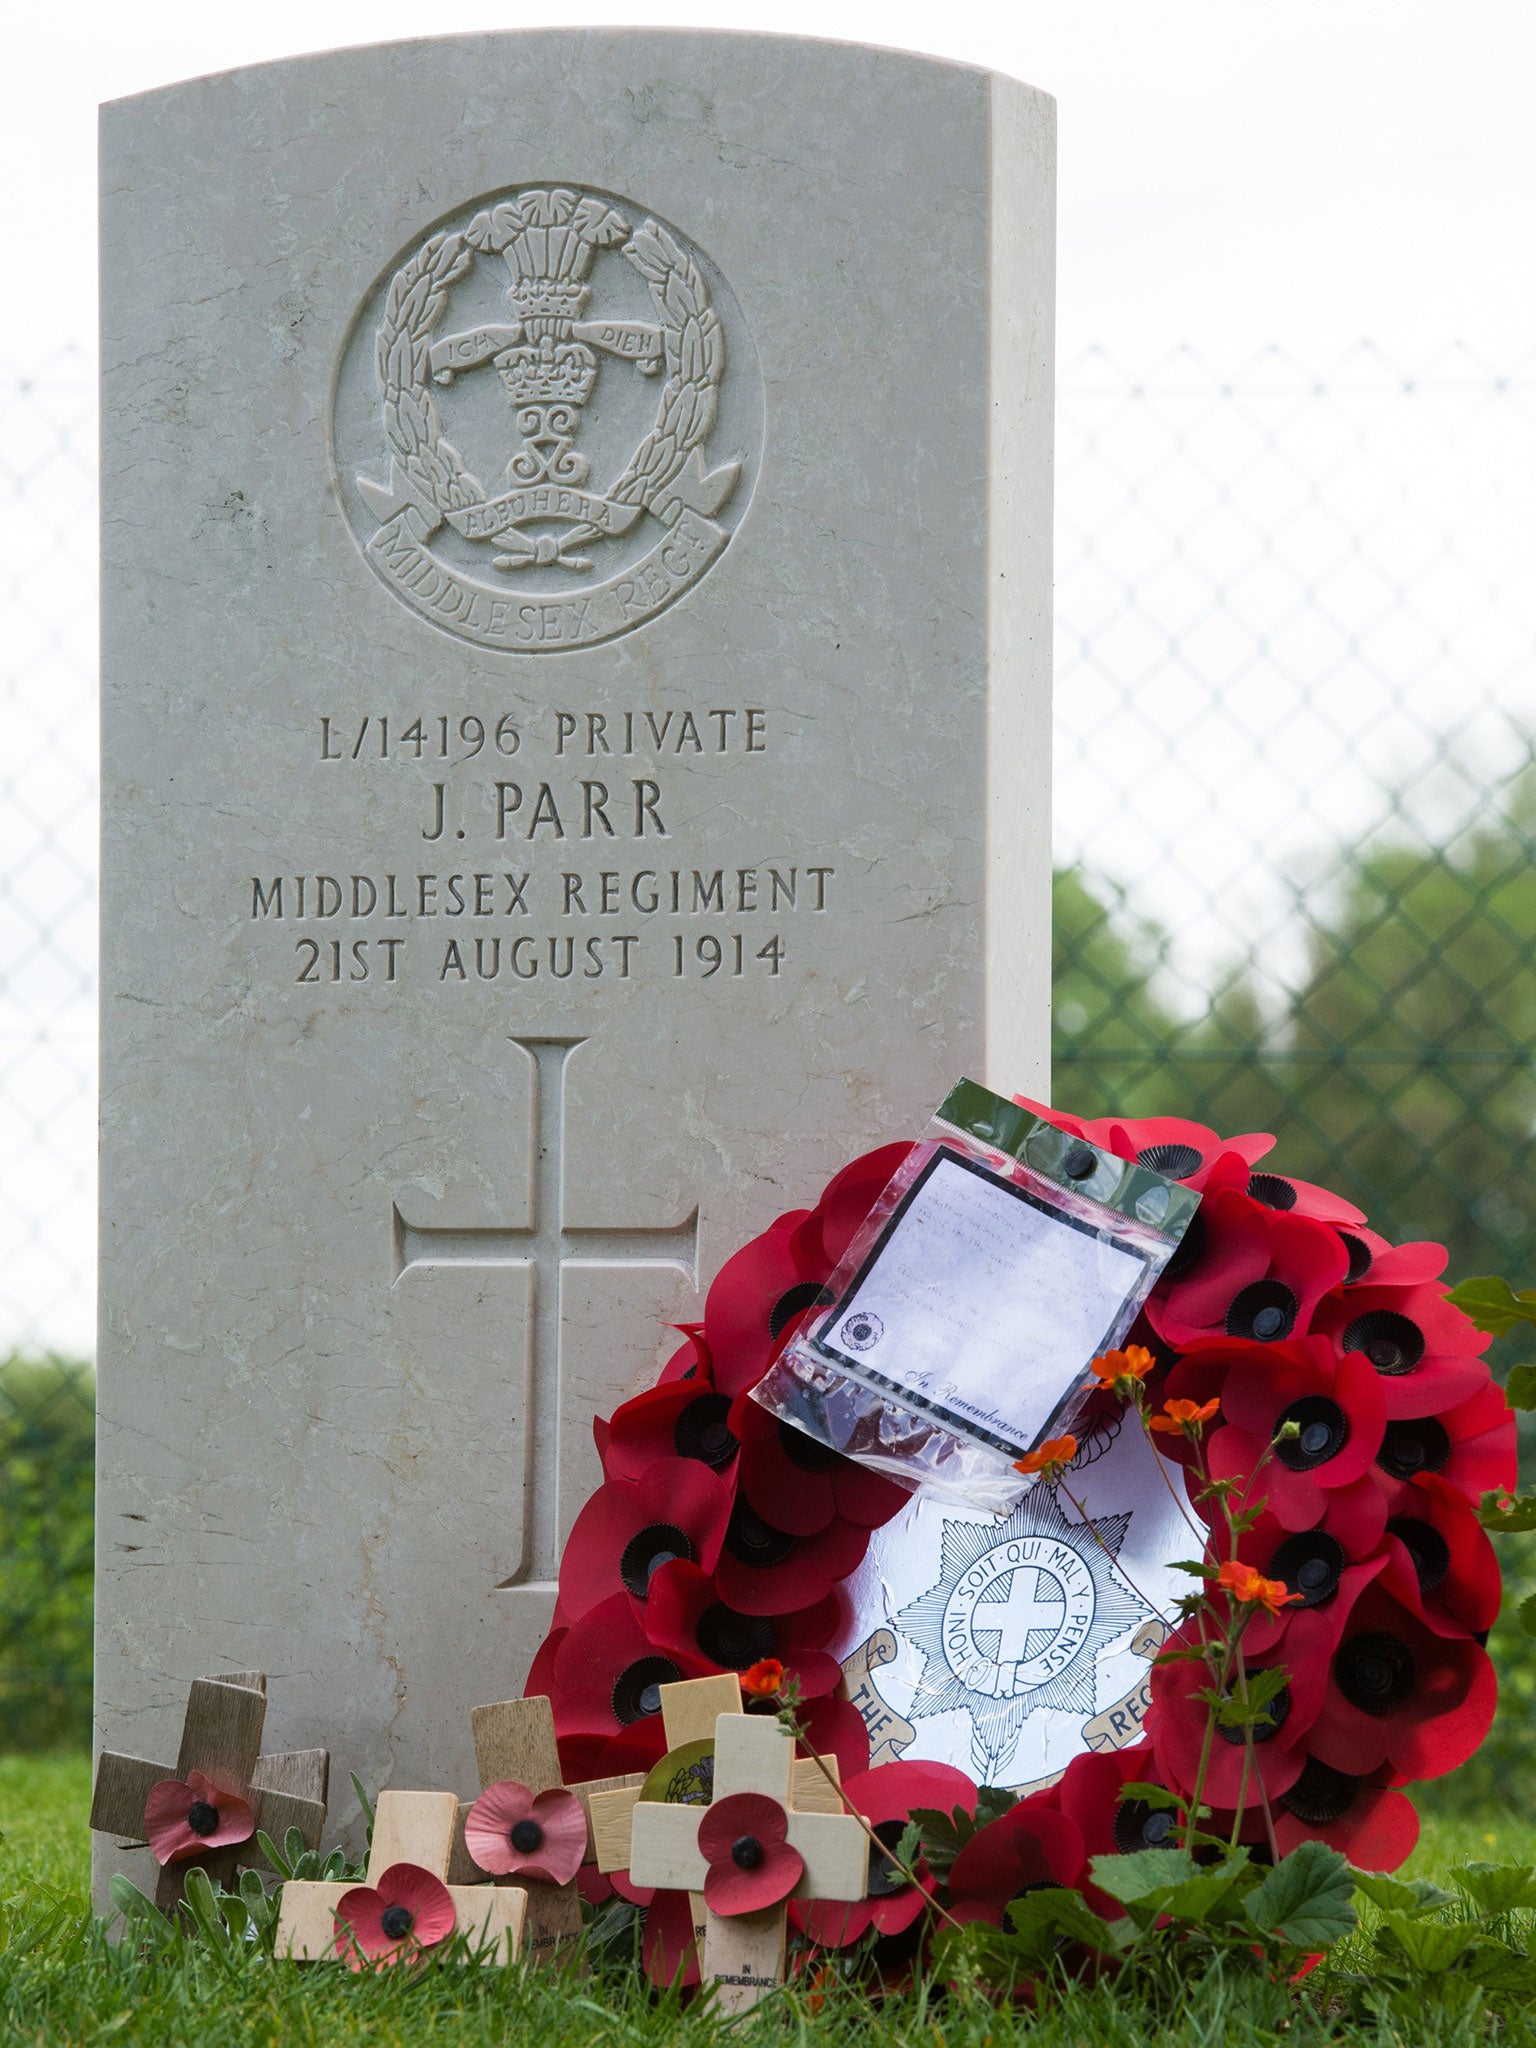 The grave in Saint Symphorien cemetery of Private John Parr, the first British soldier to be killed in action on the Western Front